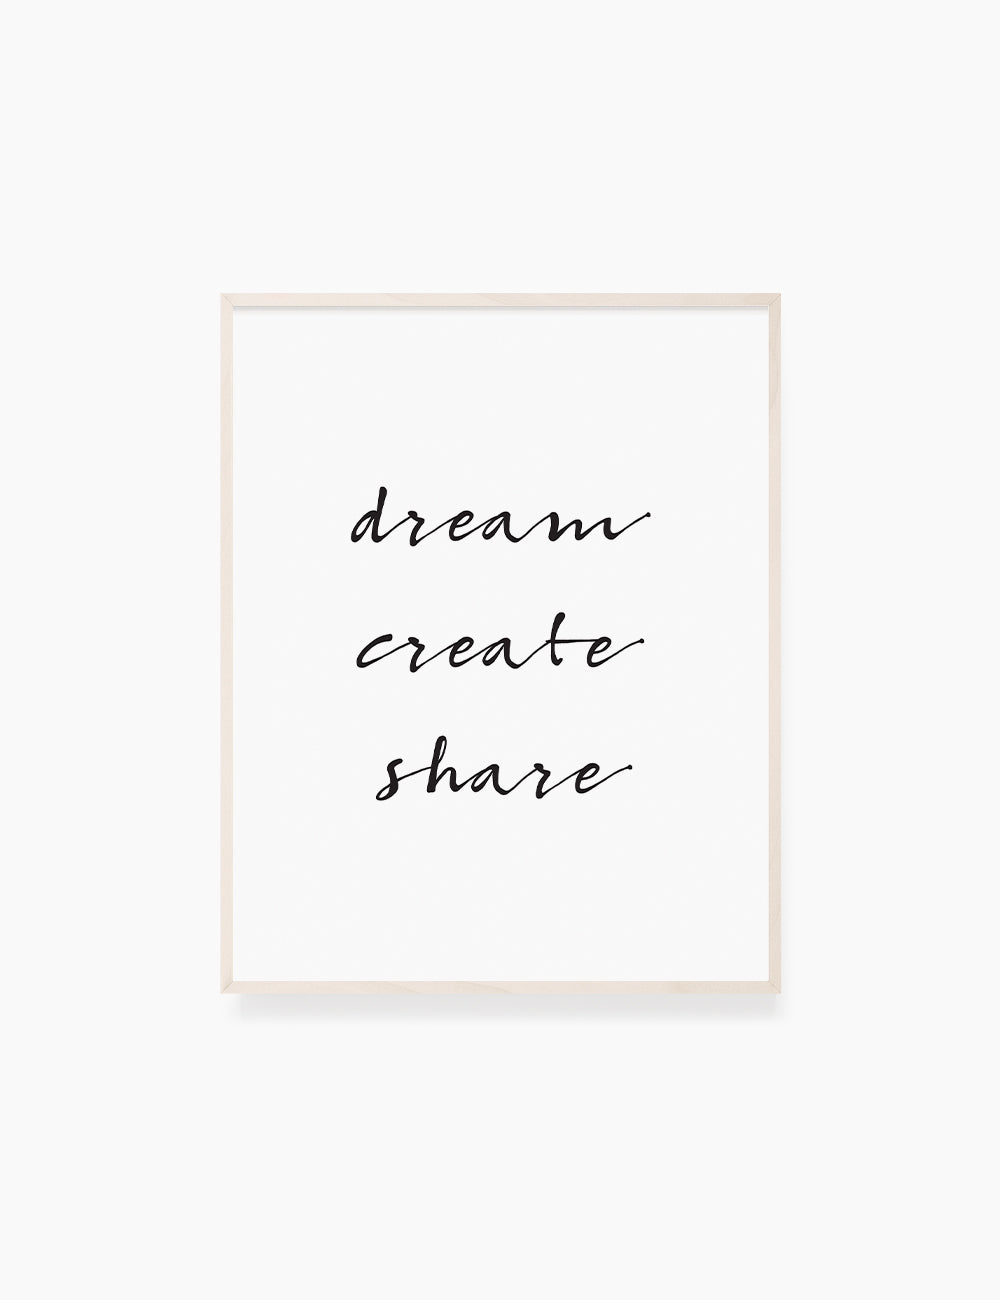 Printable Wall Art Quote: DREAM. CREATE. SHARE. Printable Poster. Inspirational Quote. Motivational Quote. WA014 - Paper Moon Art & Design